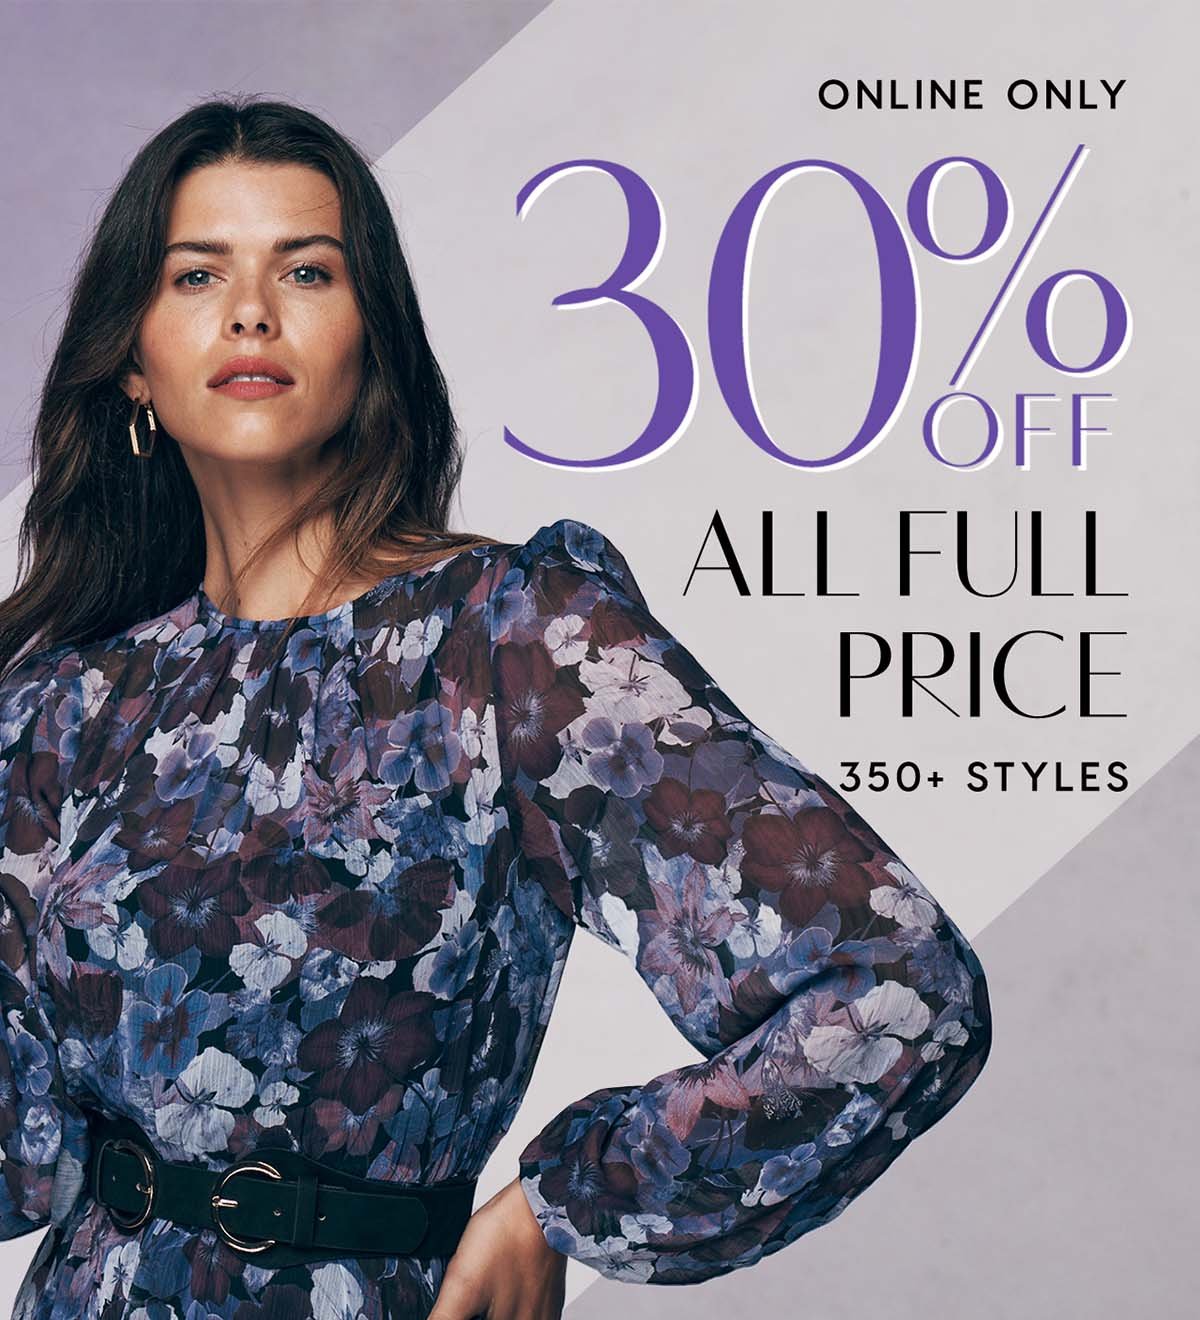 30% Off All Full Price. 650+ Styles. Online & In-Store For VIPs